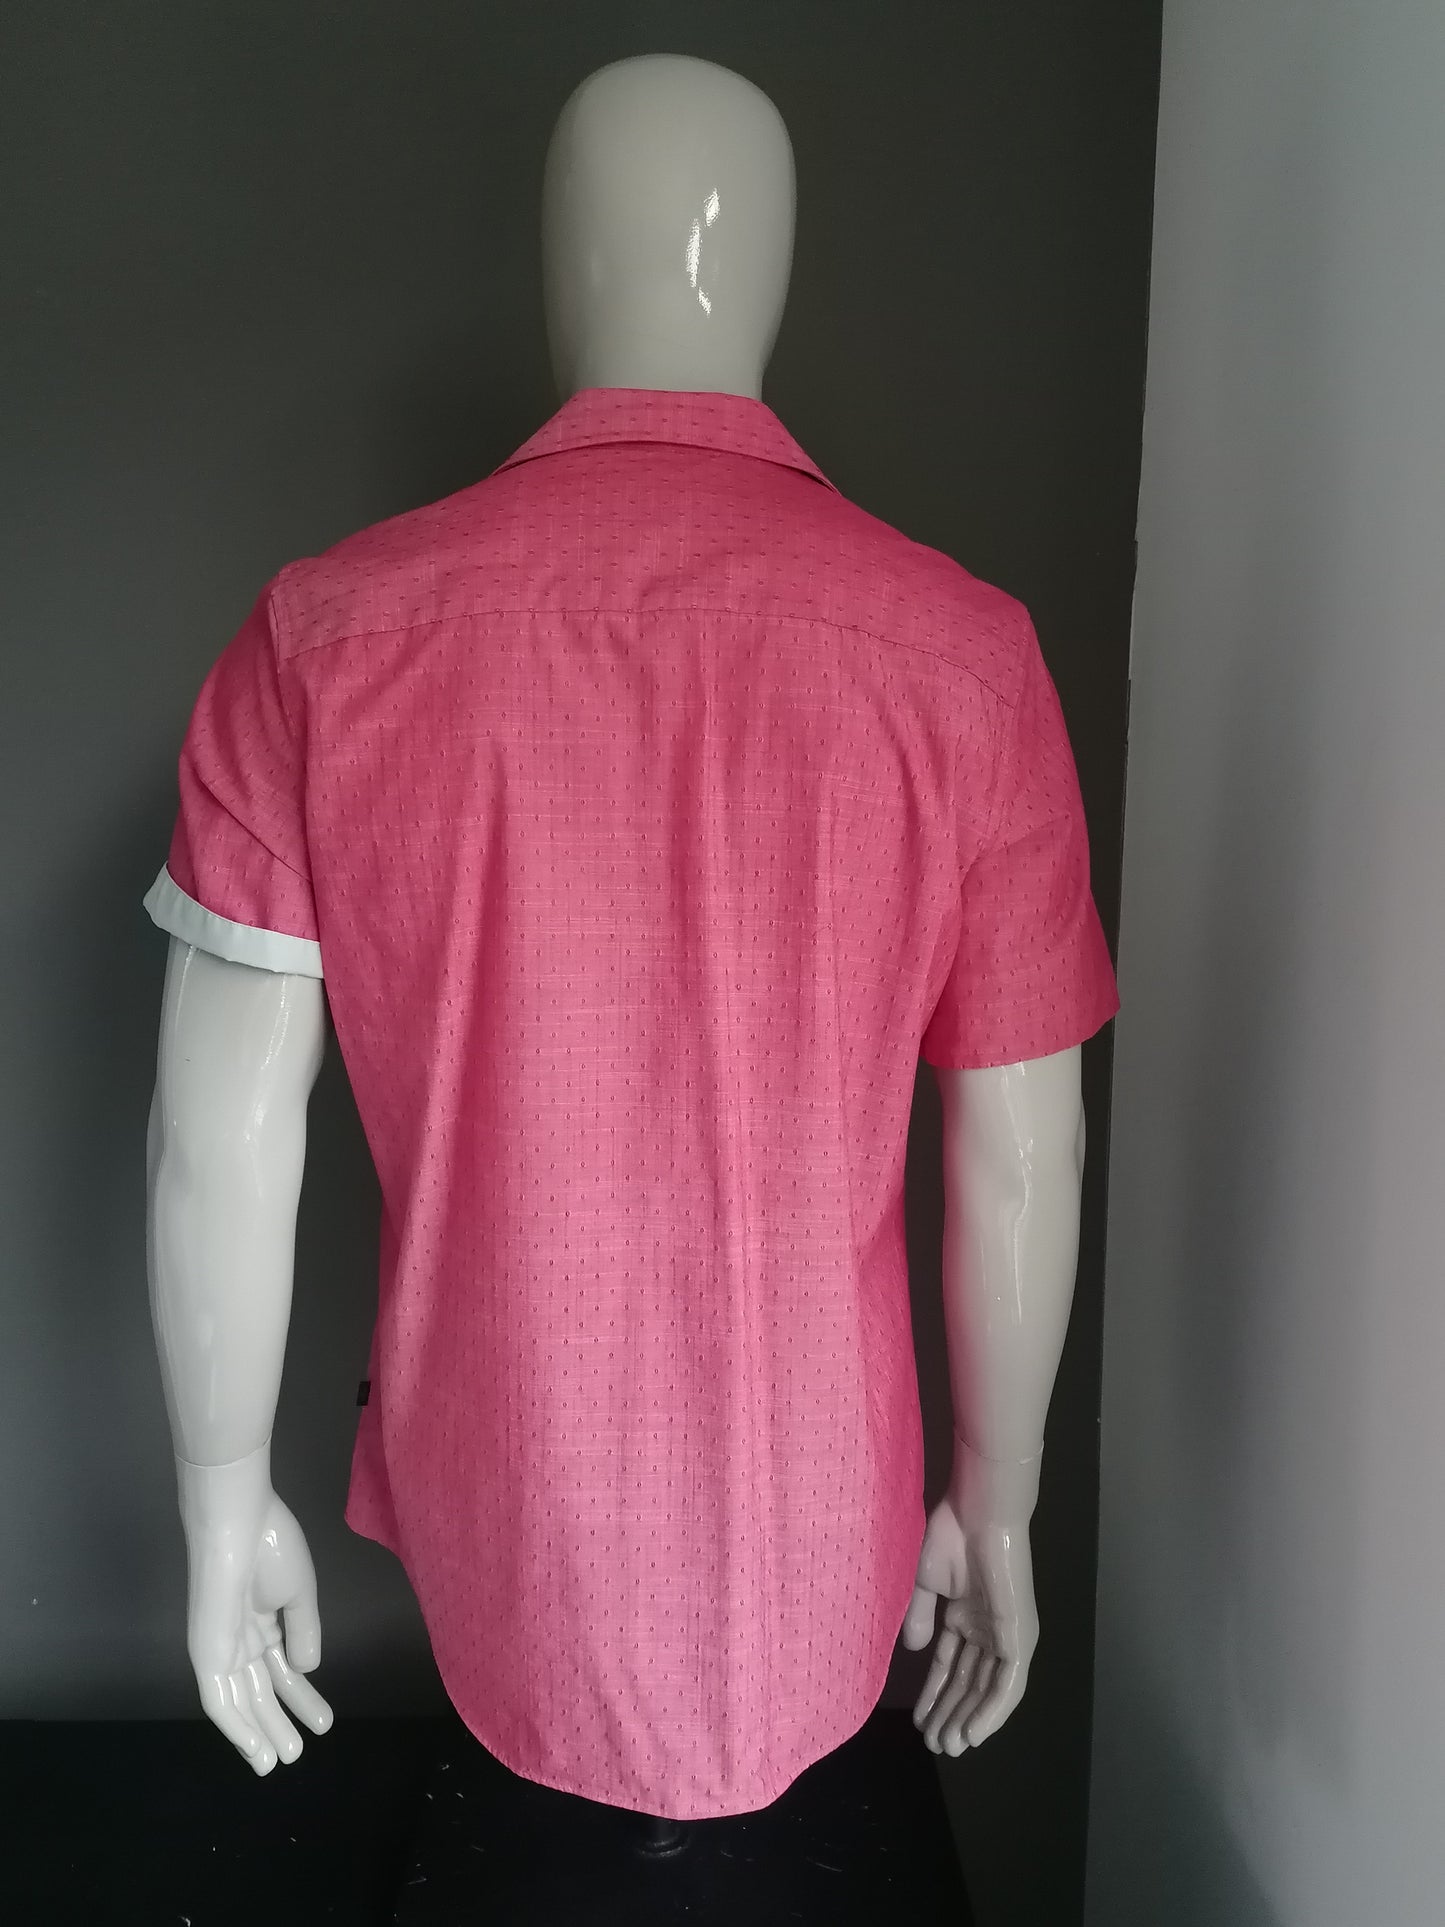 Engbers shirt short sleeve. Pink red palpable motif. Size L.